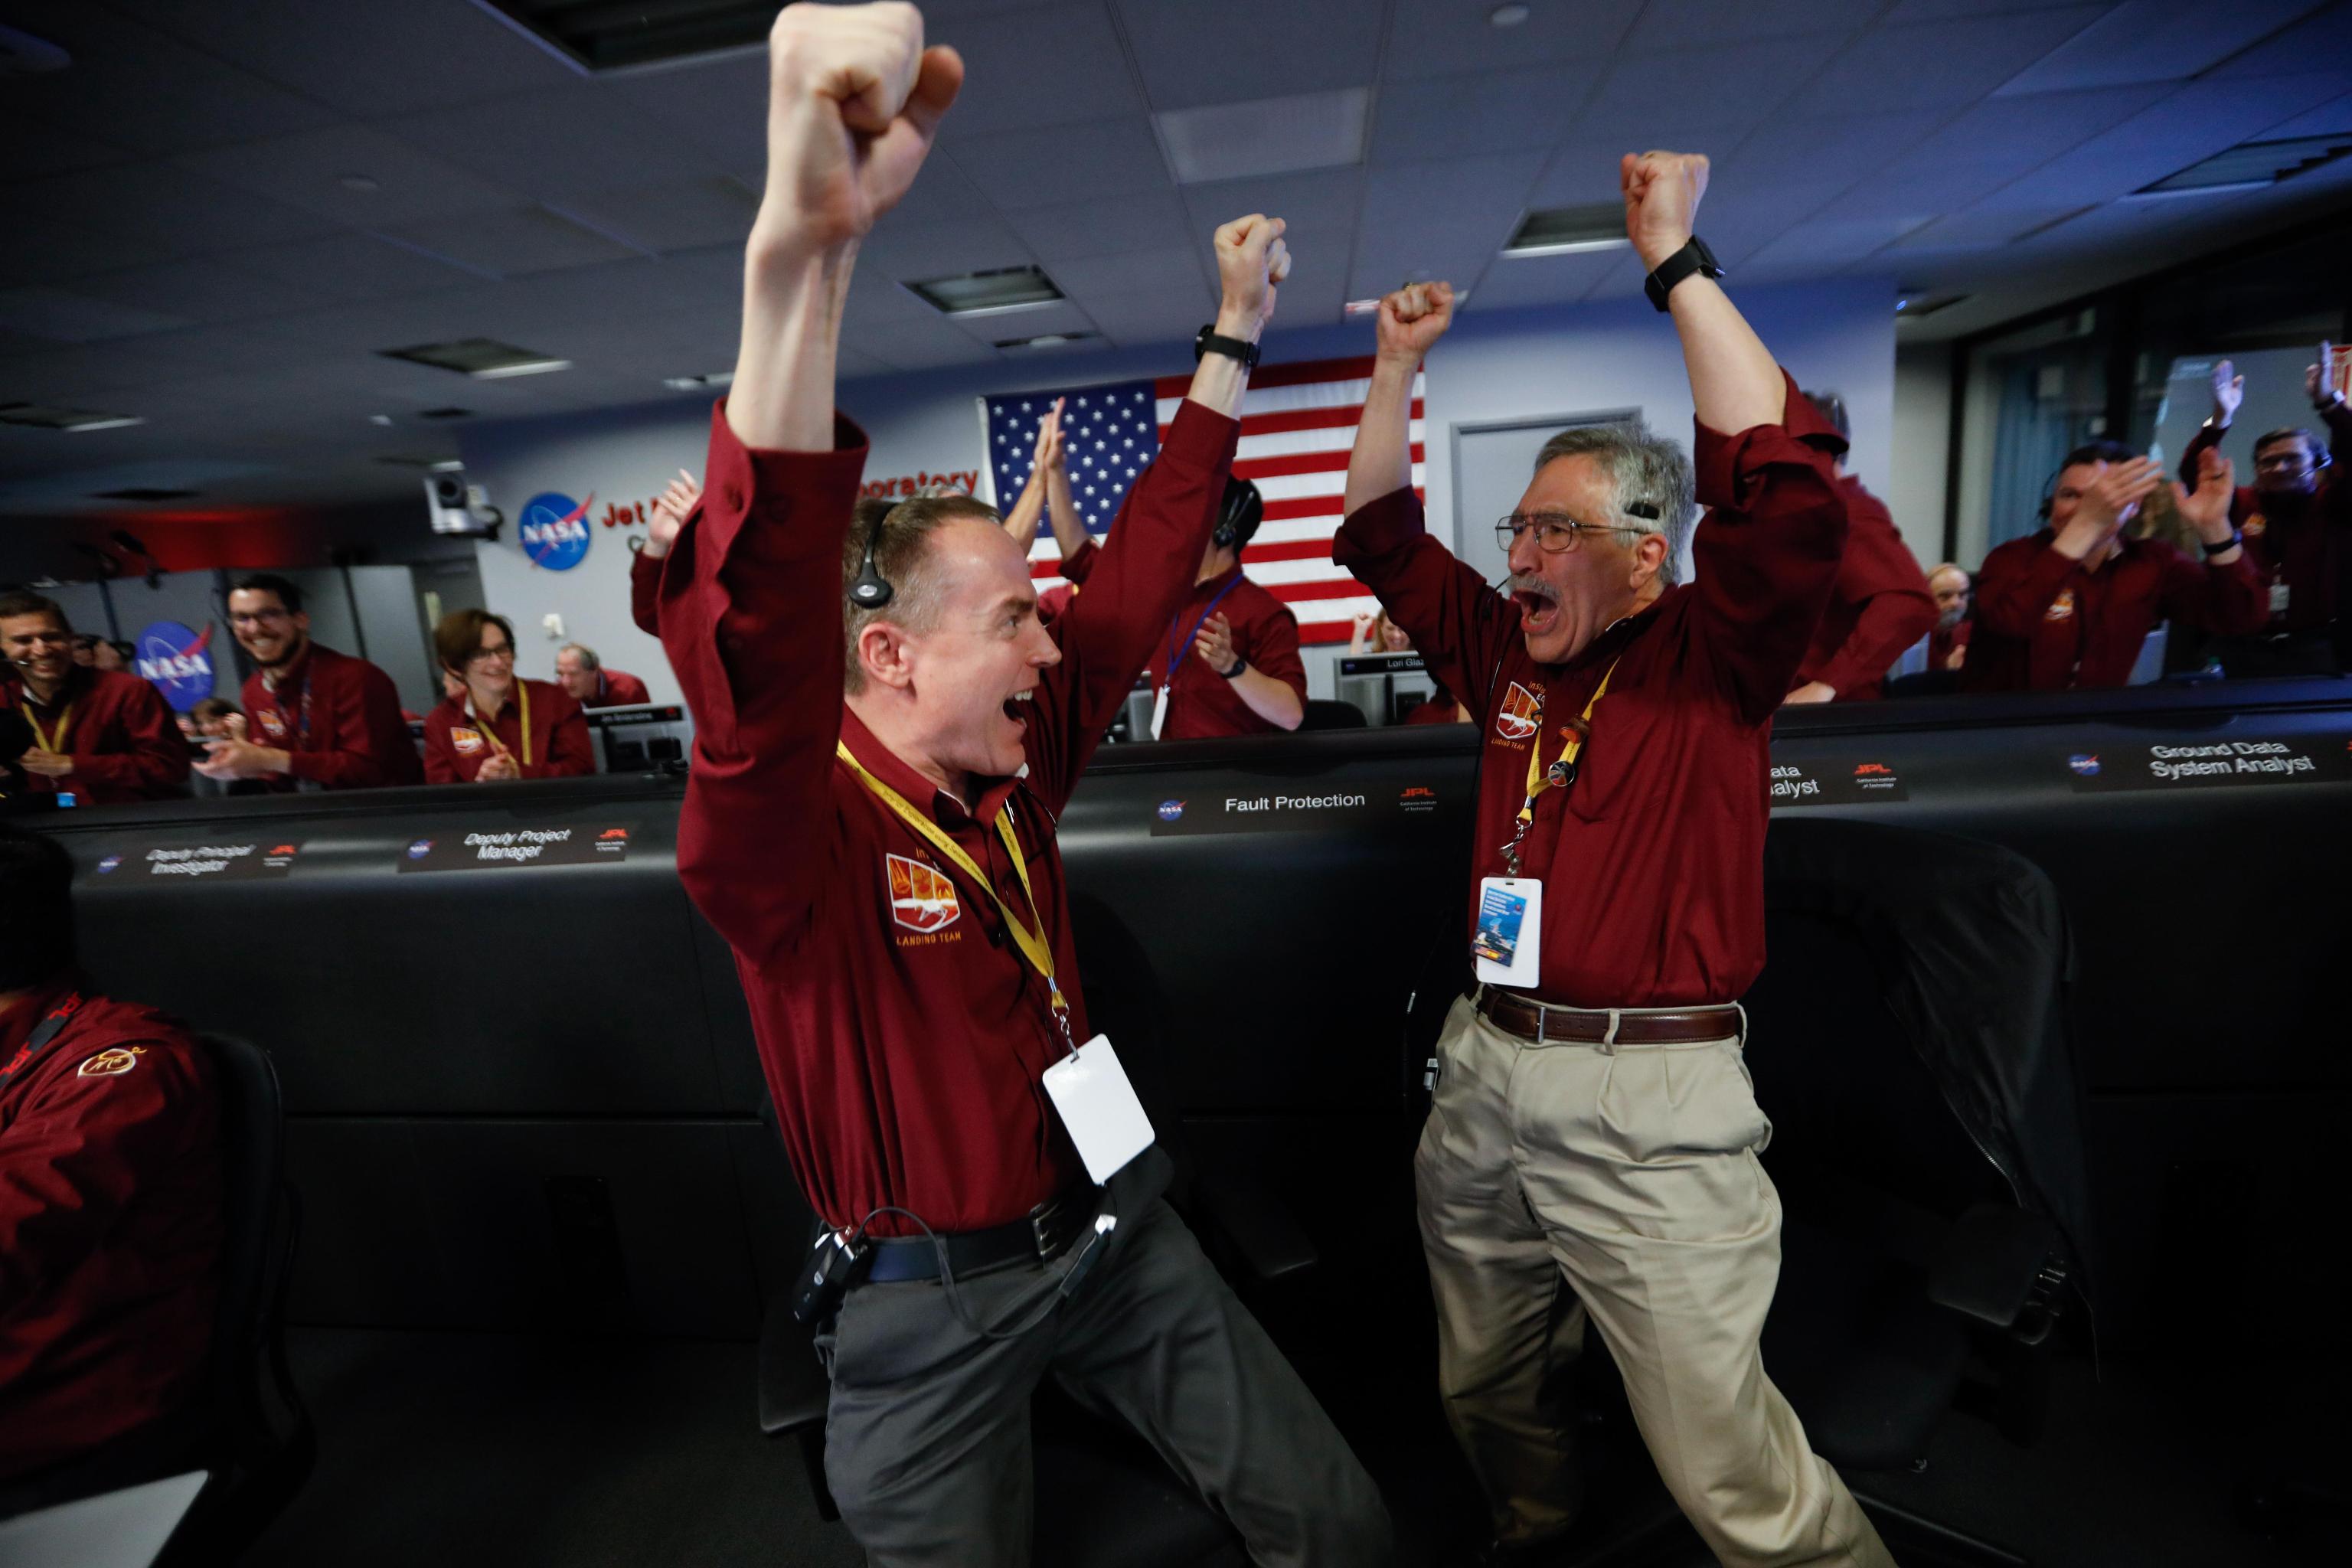 epa07191863 Mars InSight team members Kris Bruvold (L) and Sandy Krasner (R) react after receiving confirmation that the Mars InSight lander successfully touched down on the surface of Mars, inside the Mission Support Area at NASA's Jet Propulsion Laboratory in Pasadena, California, USA, 26 November 2018. InSight, short for Interior Exploration using Seismic Investigations, Geodesy and Heat Transport, is a Mars lander designed to study the 'inner space' of Mars: its crust, mantle, and core.  EPA/AL SEIB / POOL